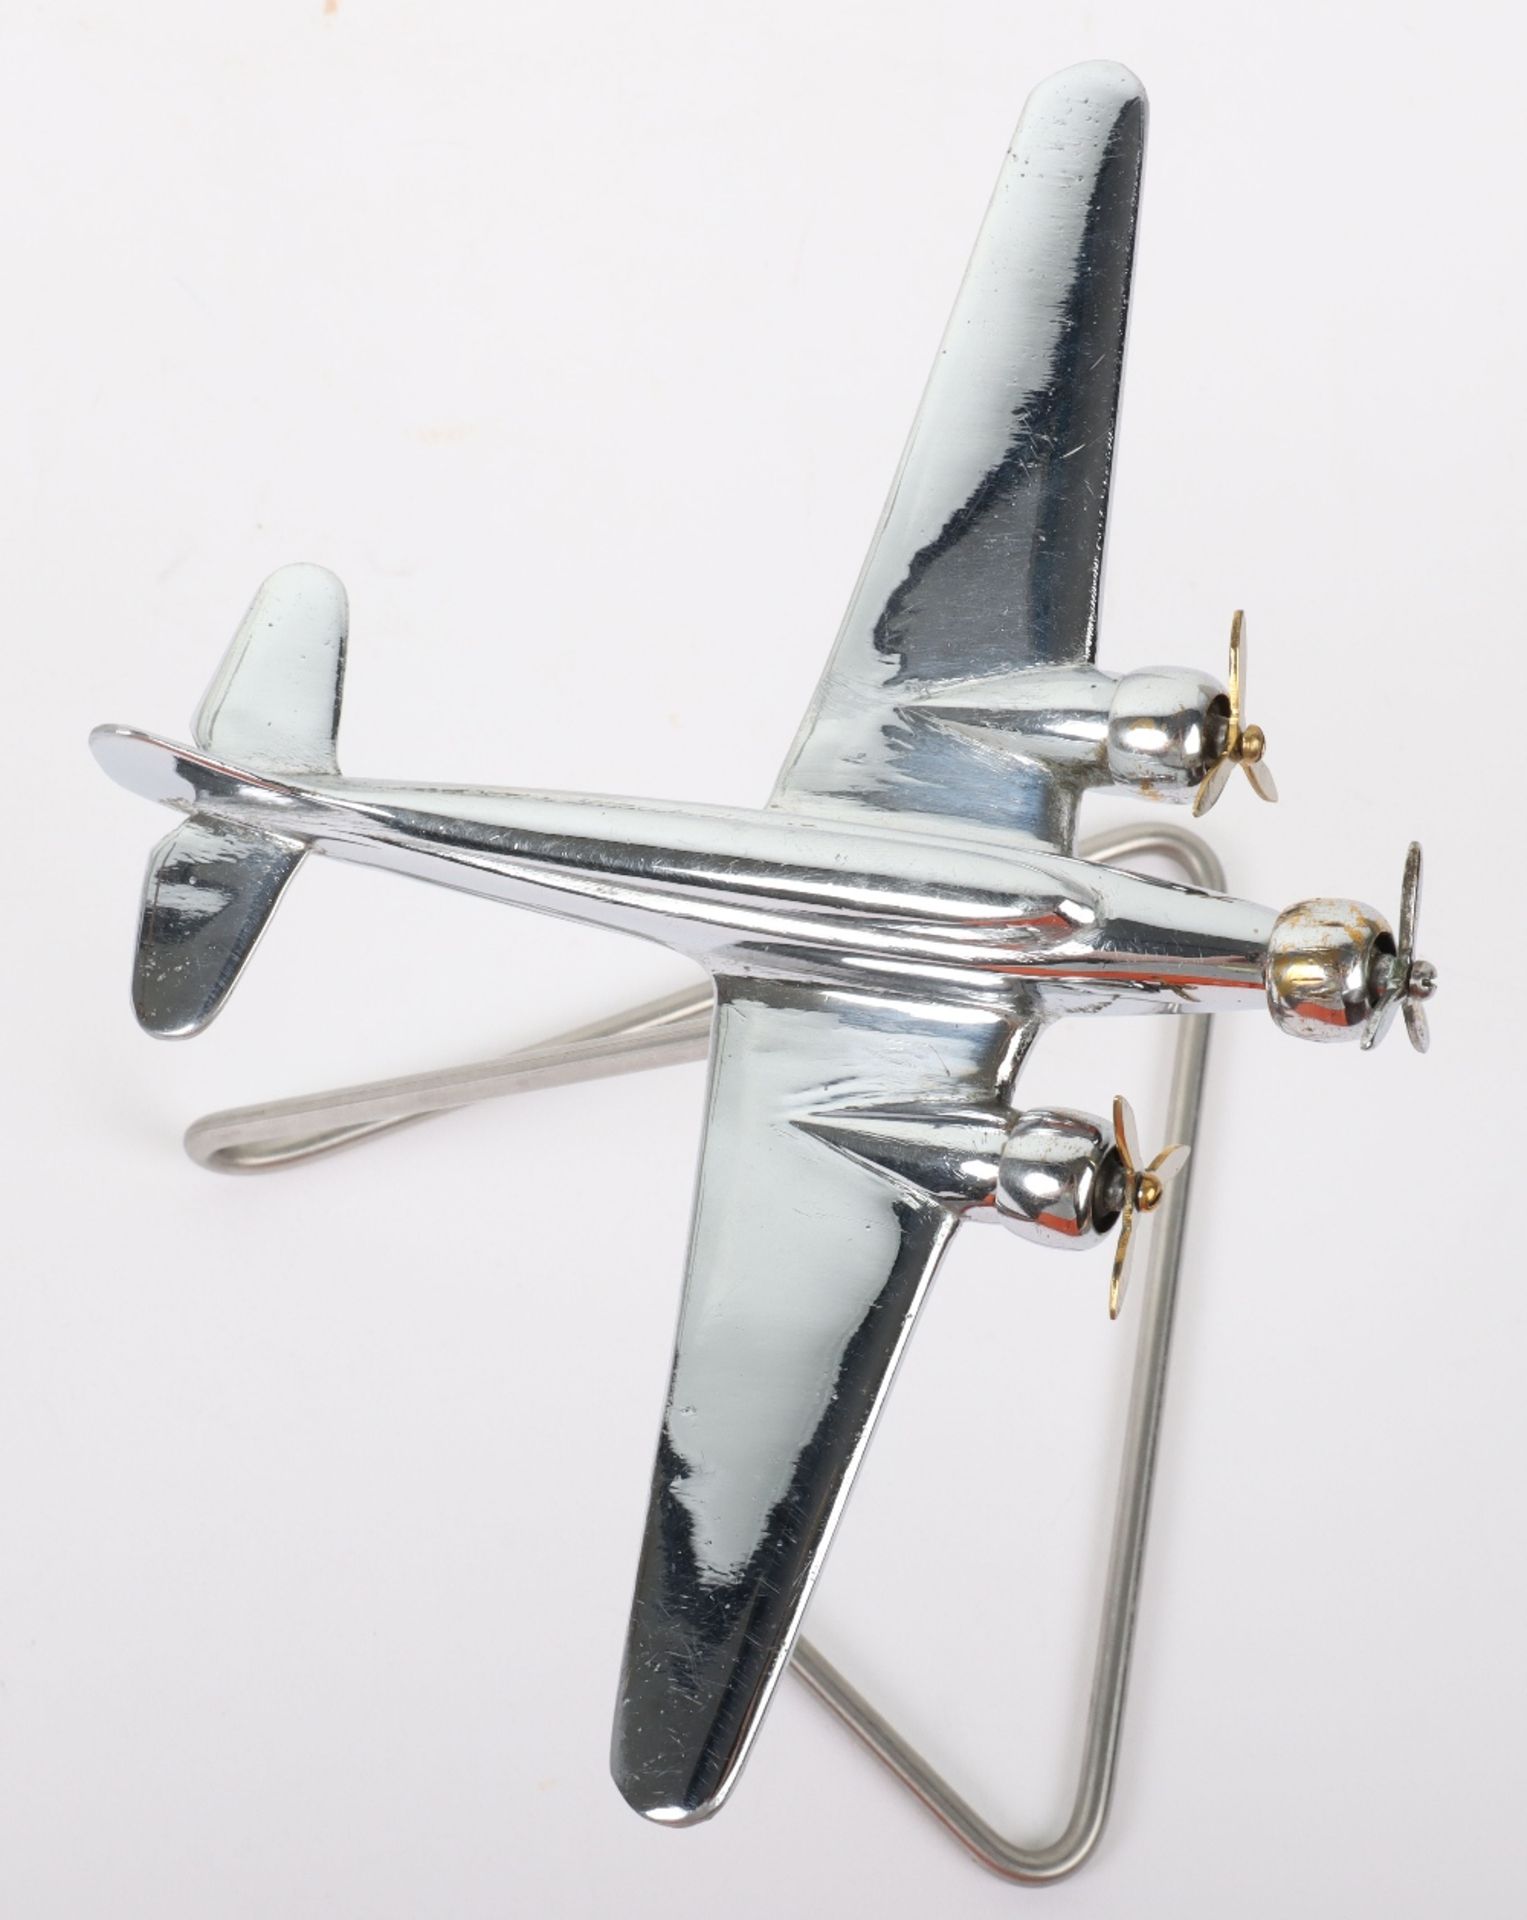 Desk Model of a Fighter Aircraft - Image 6 of 6